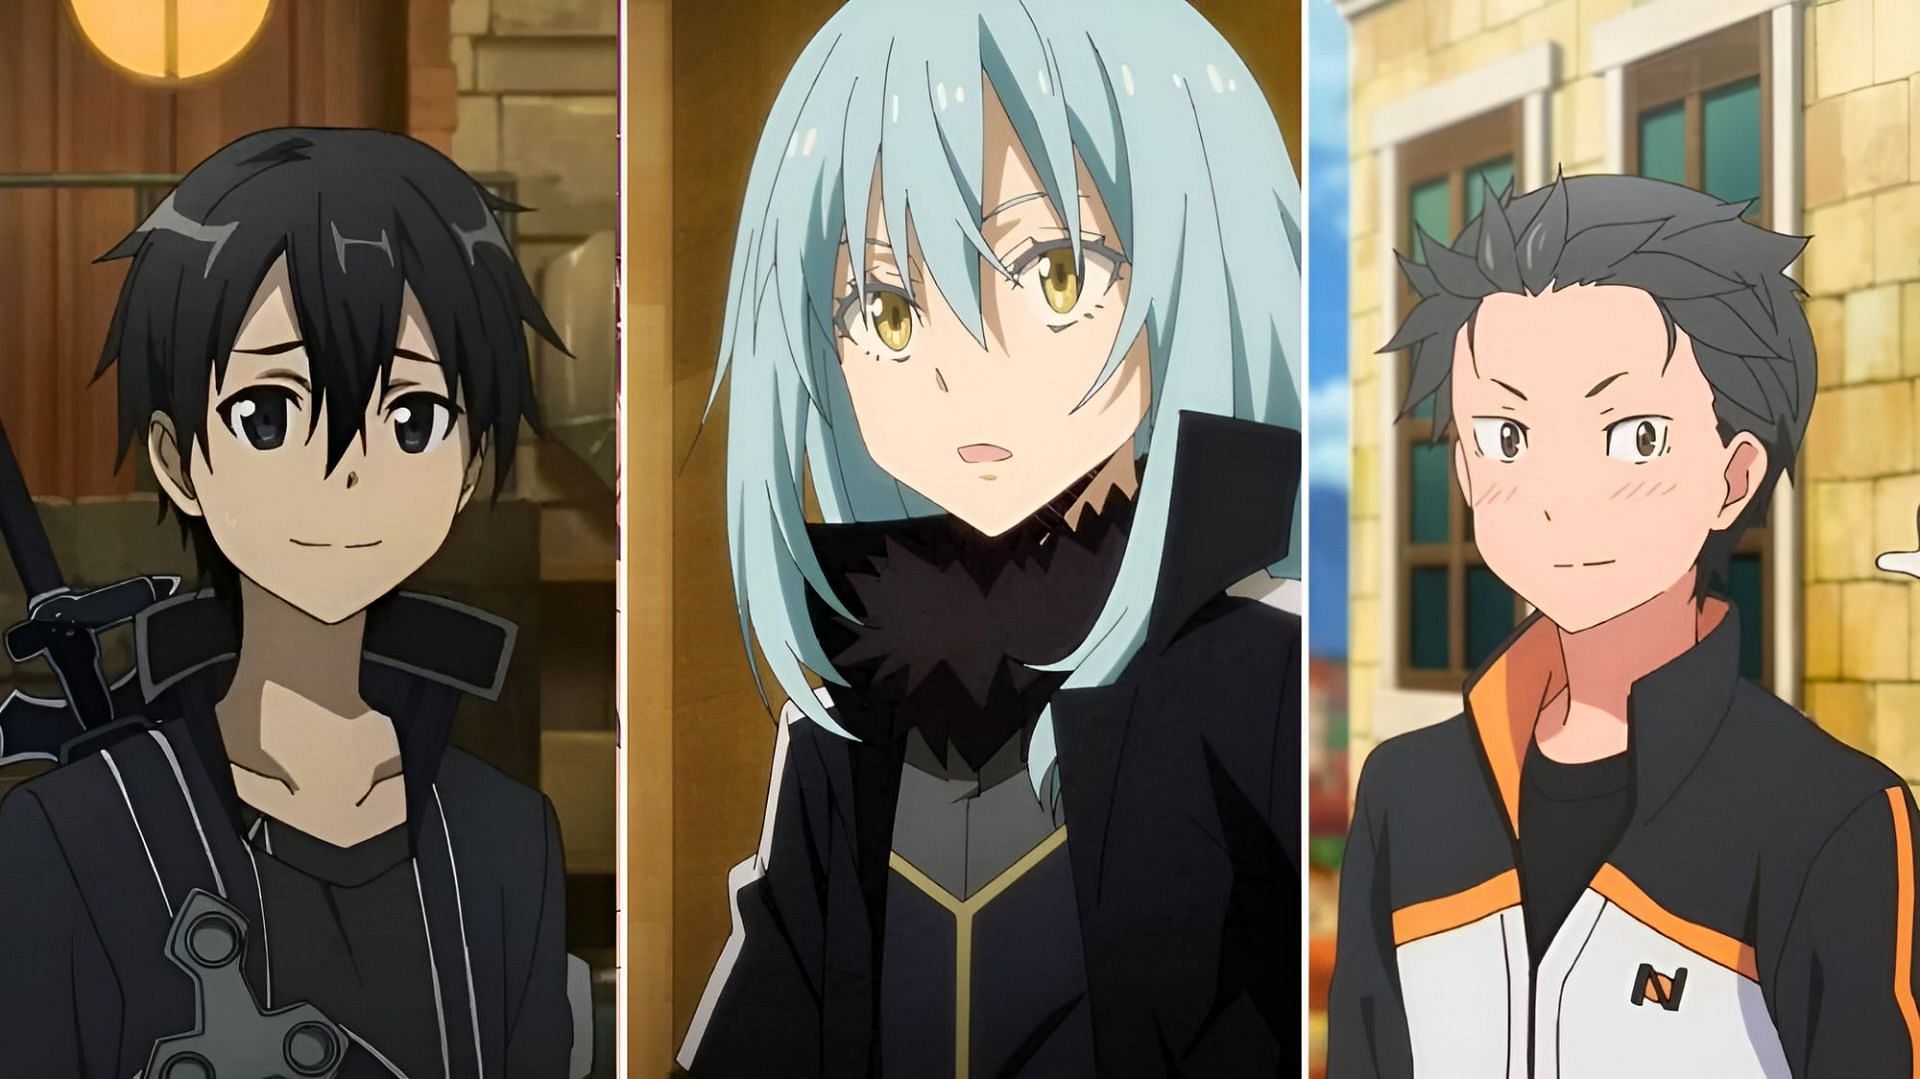 Sword Art Online, That Time I Got Reincarnated As A Slime, and Re:Zero - Starting Life in Another World 